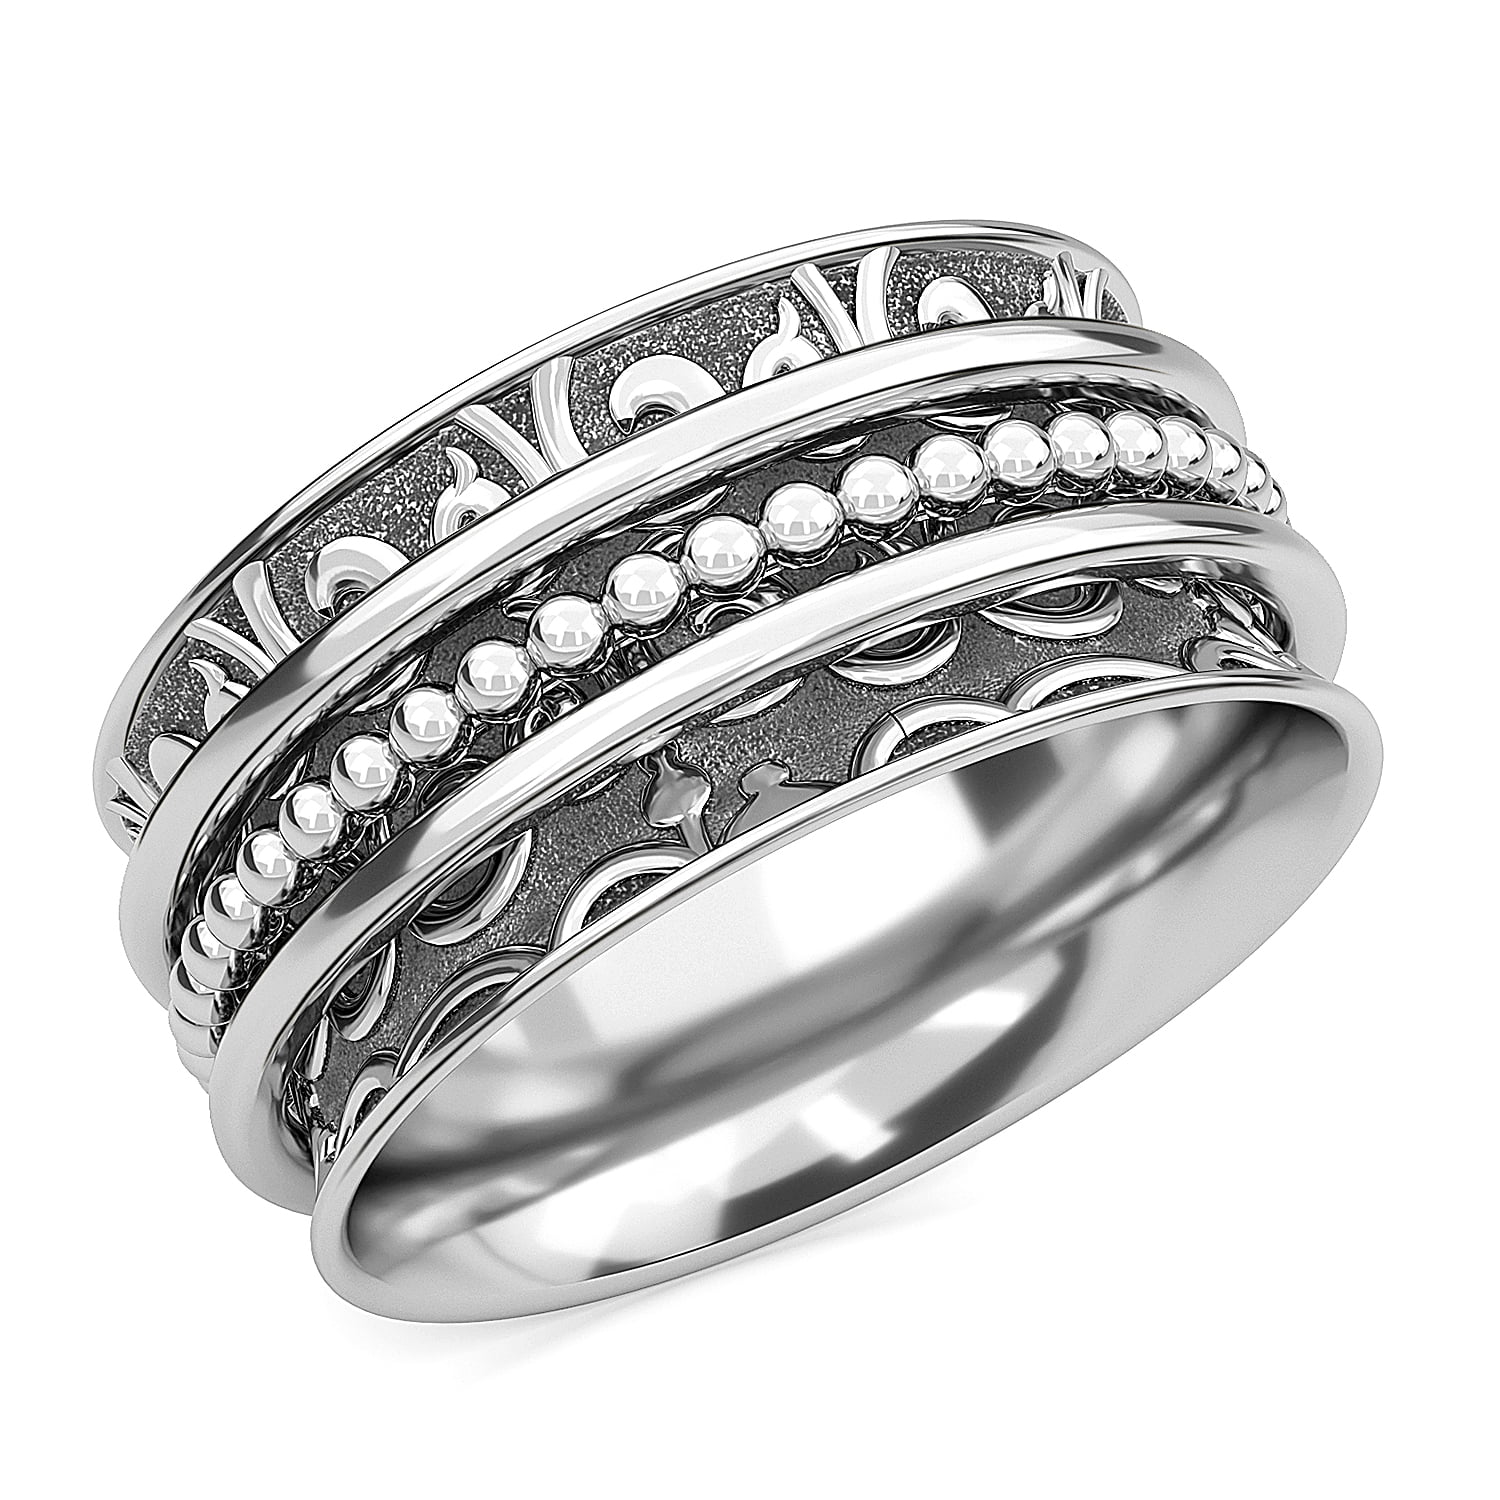 Details about   Handmade Meditation 925 Sterling Silver Spin Spinner Ring Boho Band Jewelry J_41 